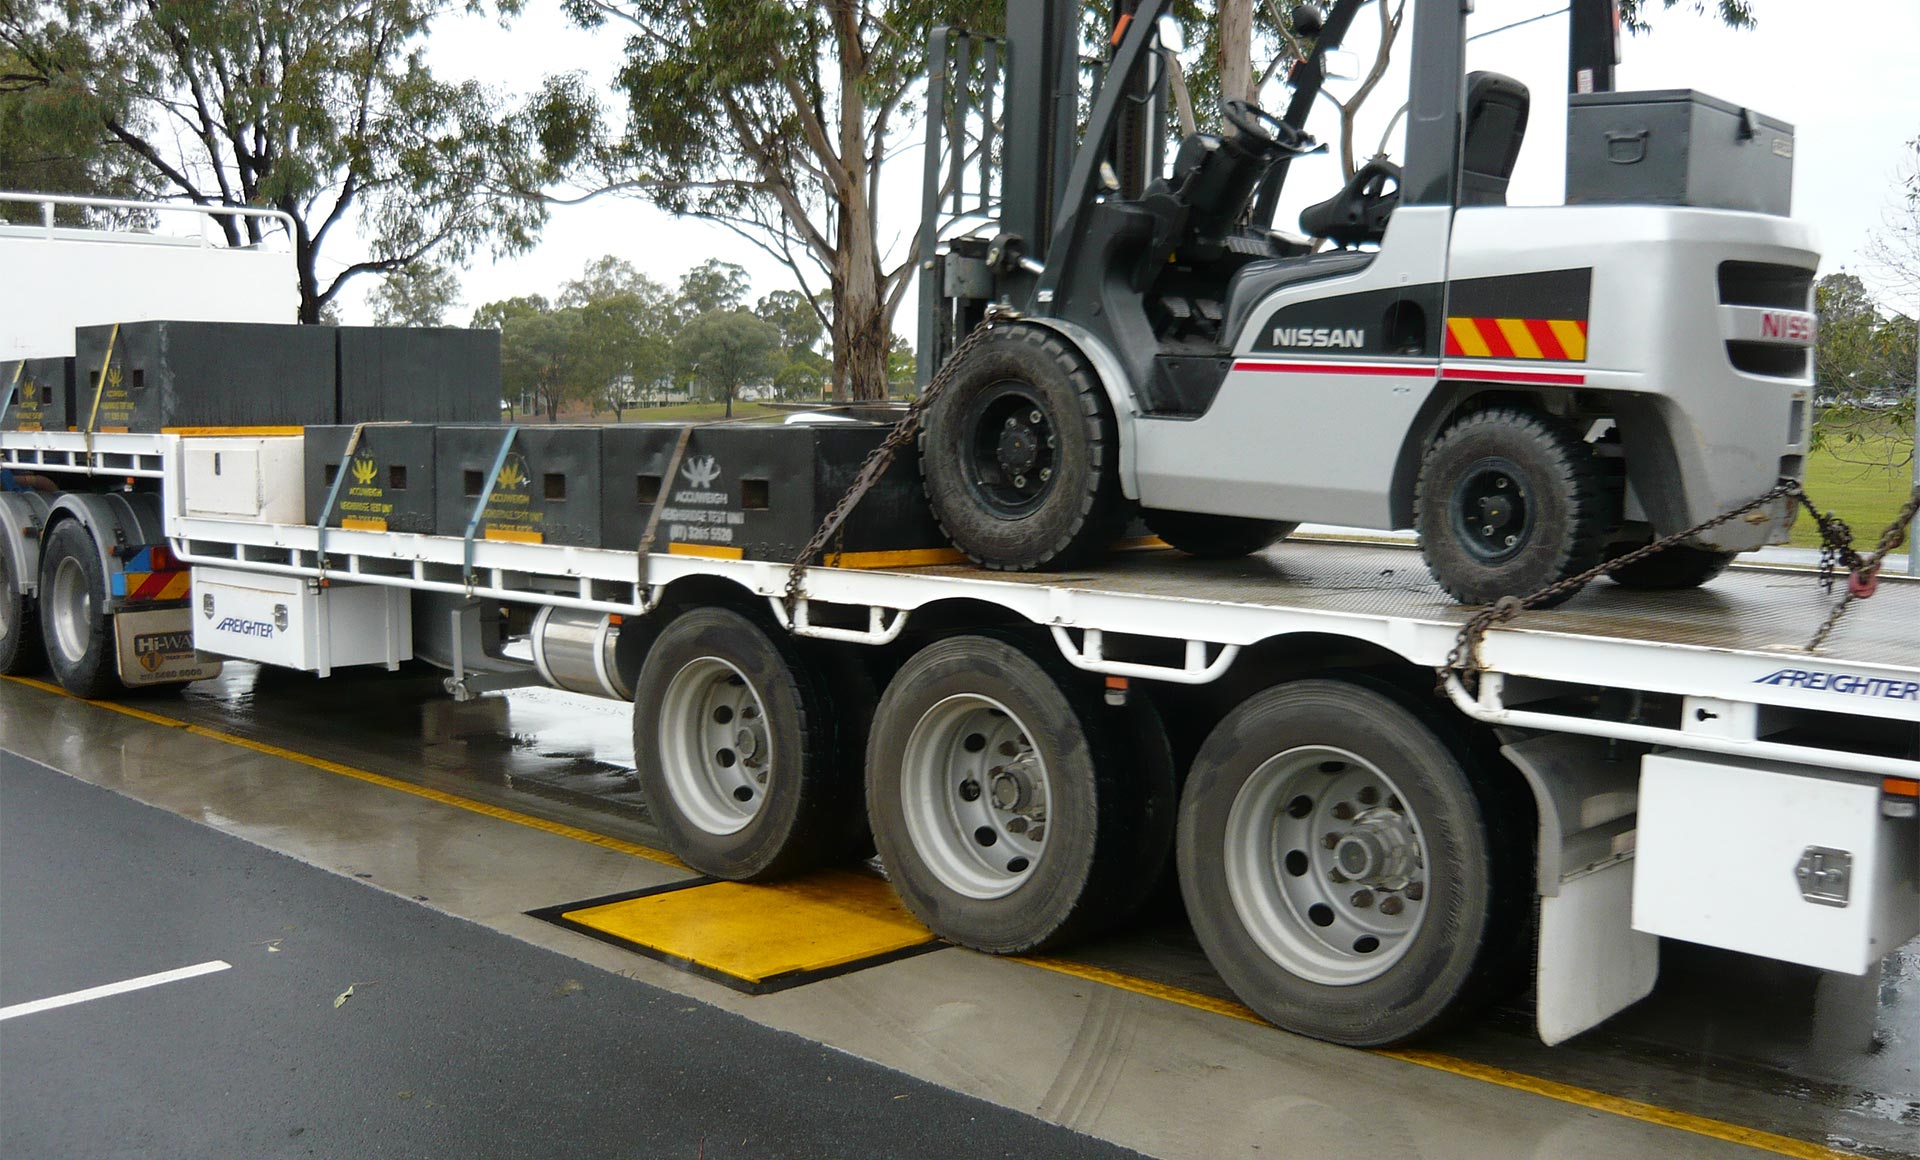 AccuWeigh Weigh-in-Motion Weighbridge in action